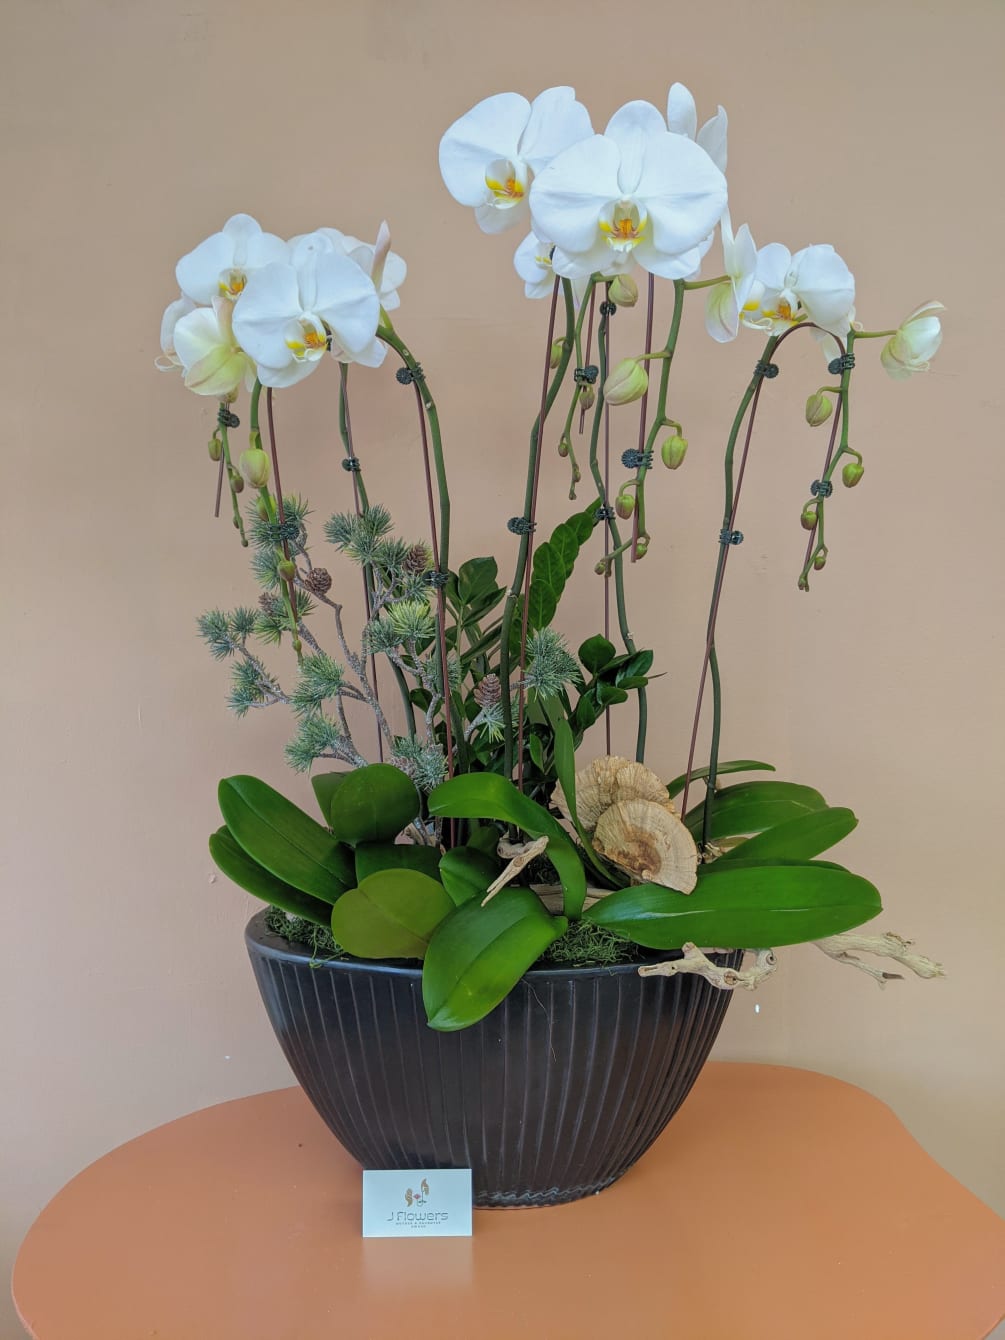 Five white orchids come planted in a black ceramic vase with wintery